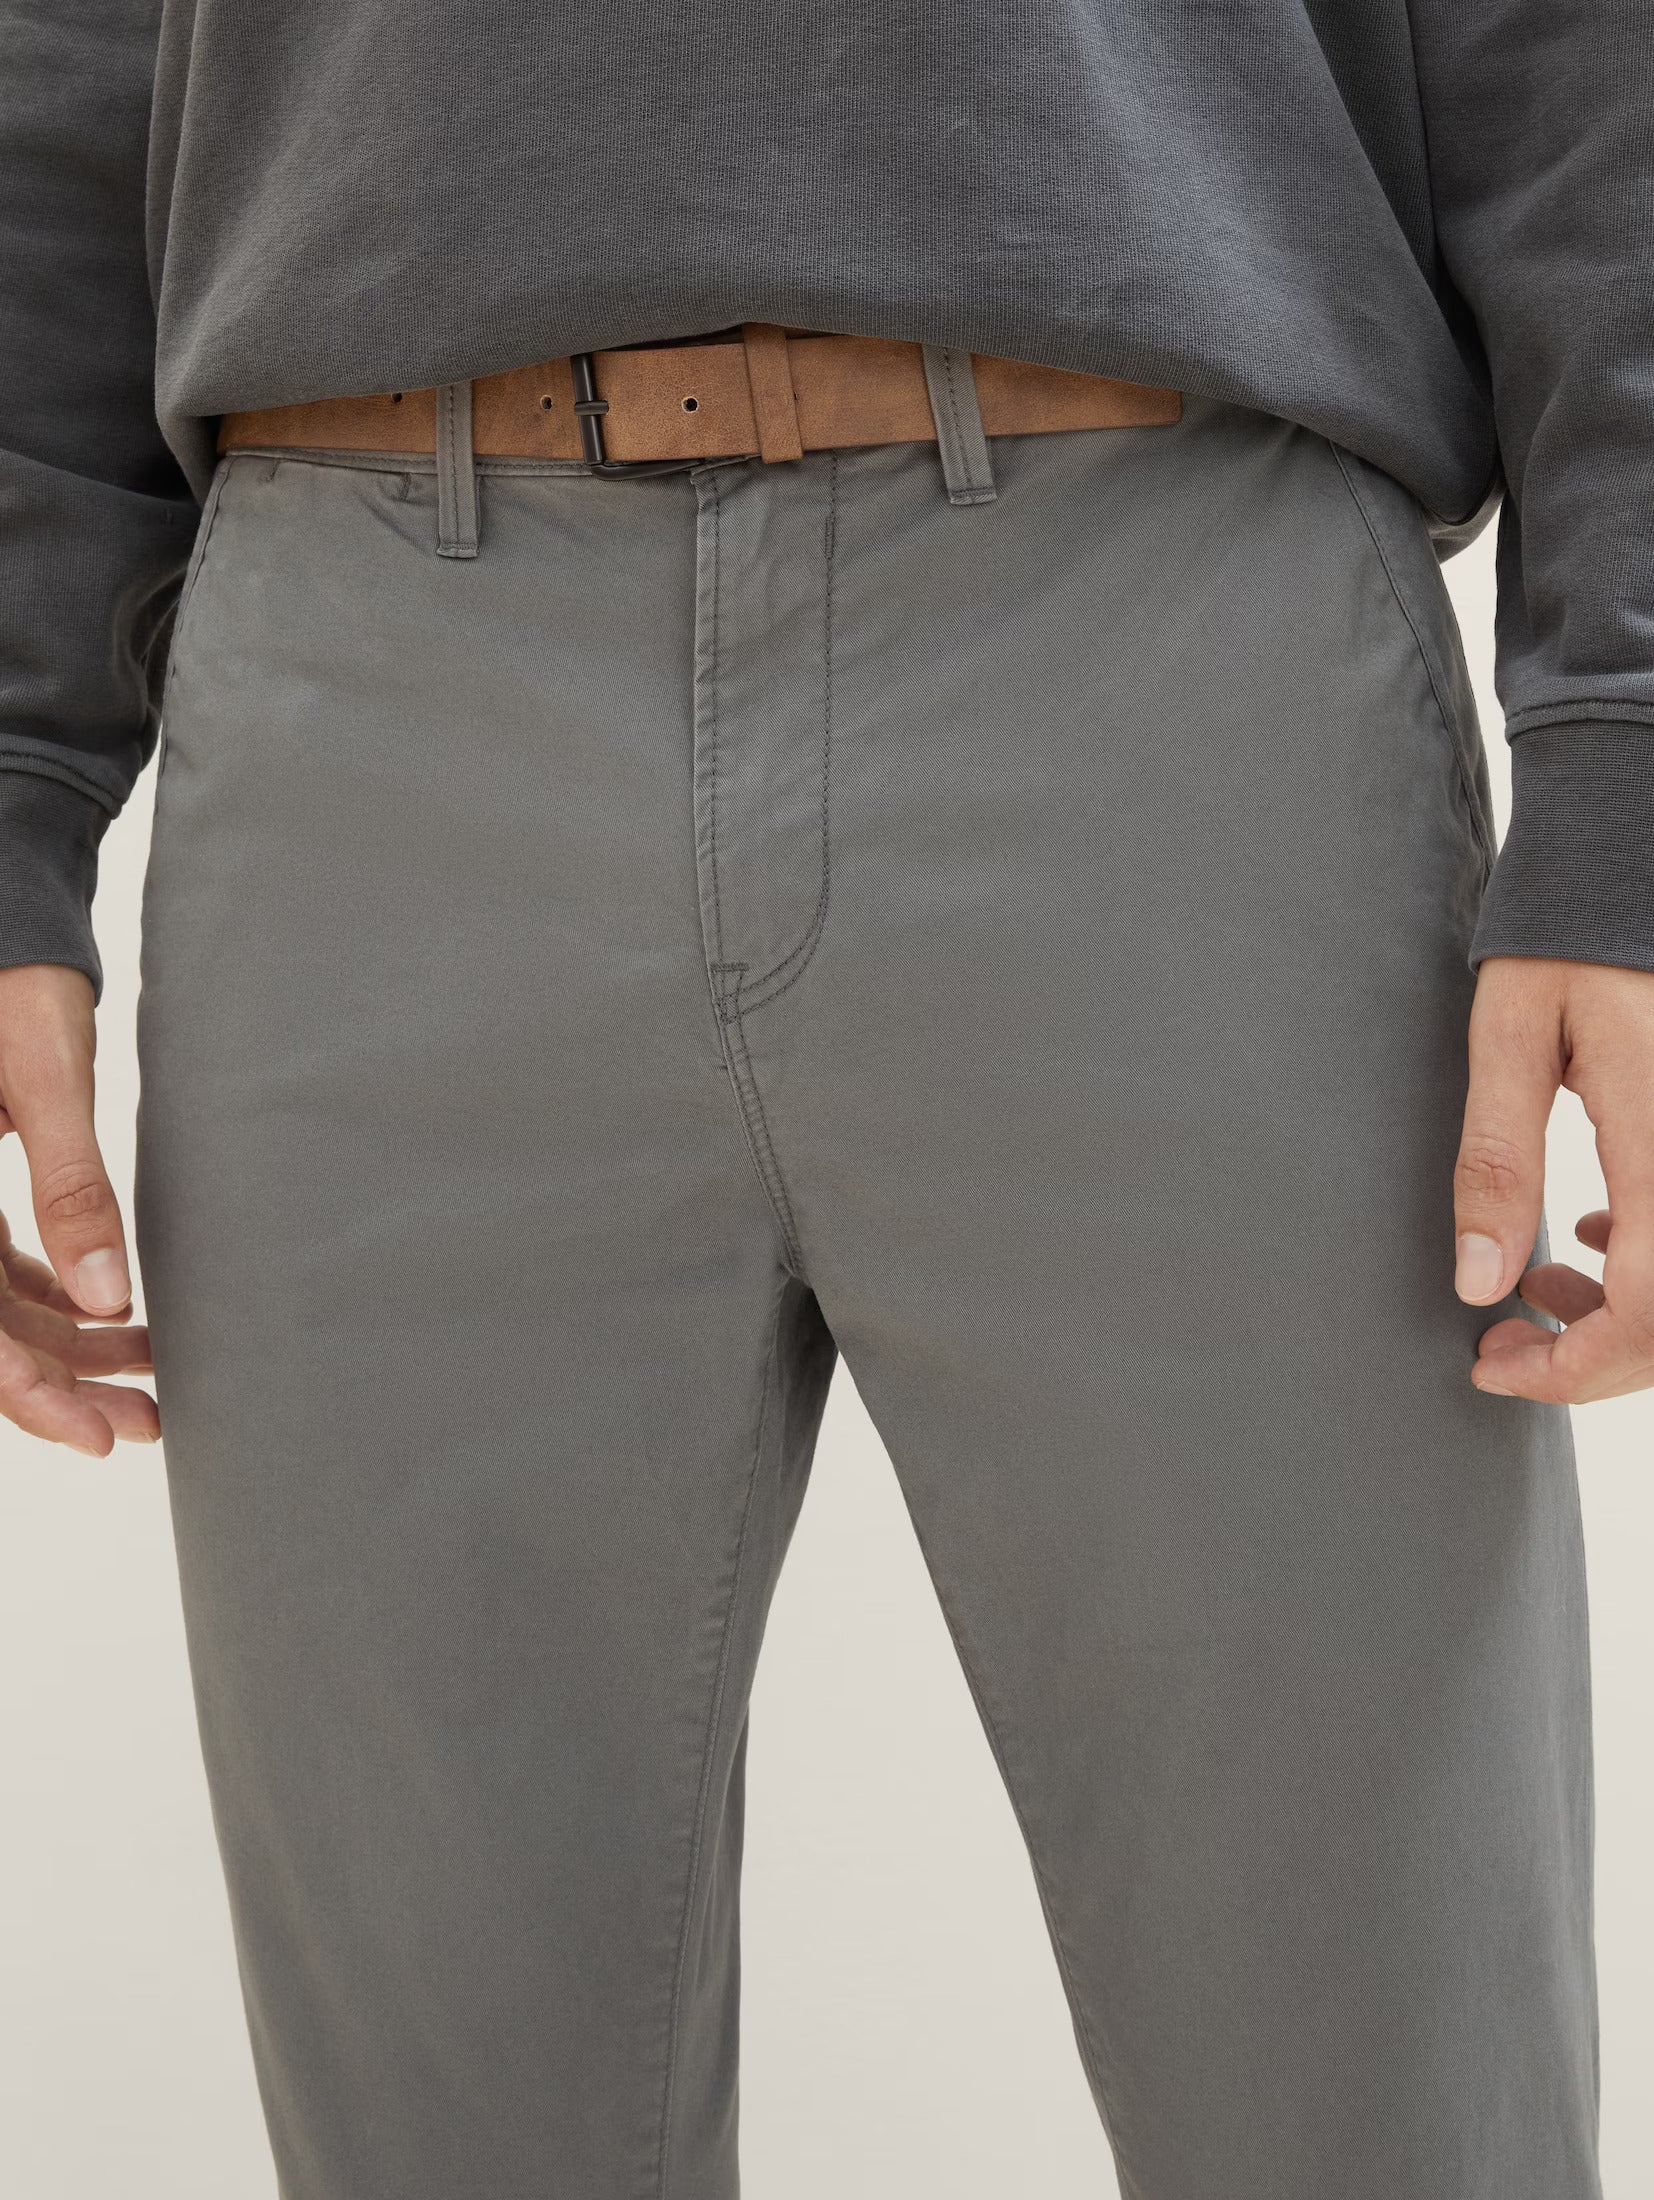 Tom Tailor Grey Chino With A Belt